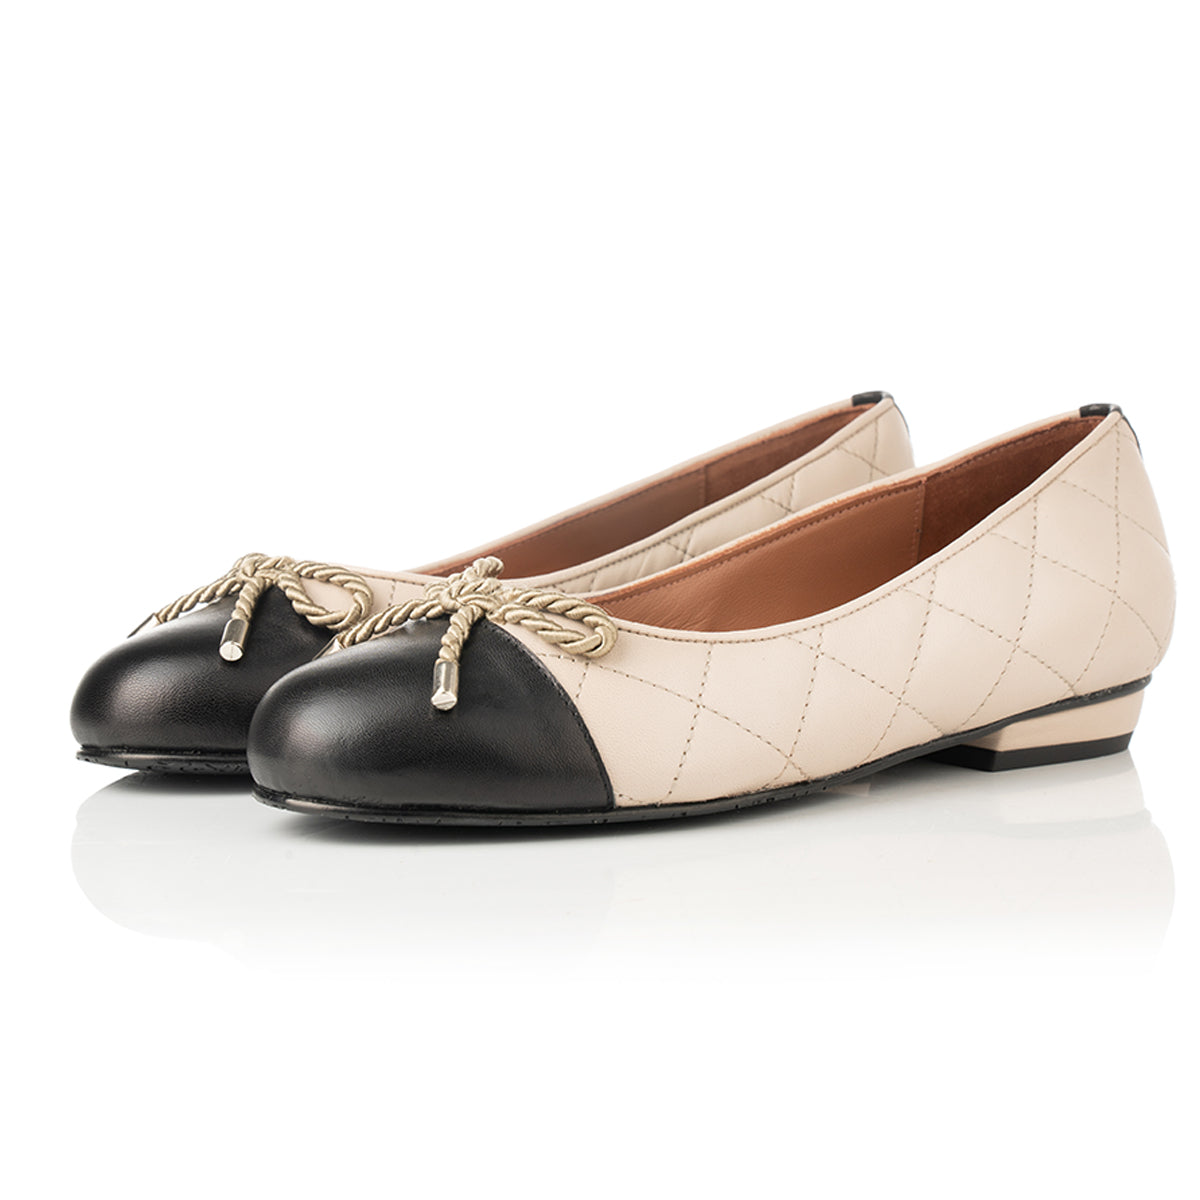 Ladies Wide Fit Flat Shoes & Sandals | Leather & Suede Flats